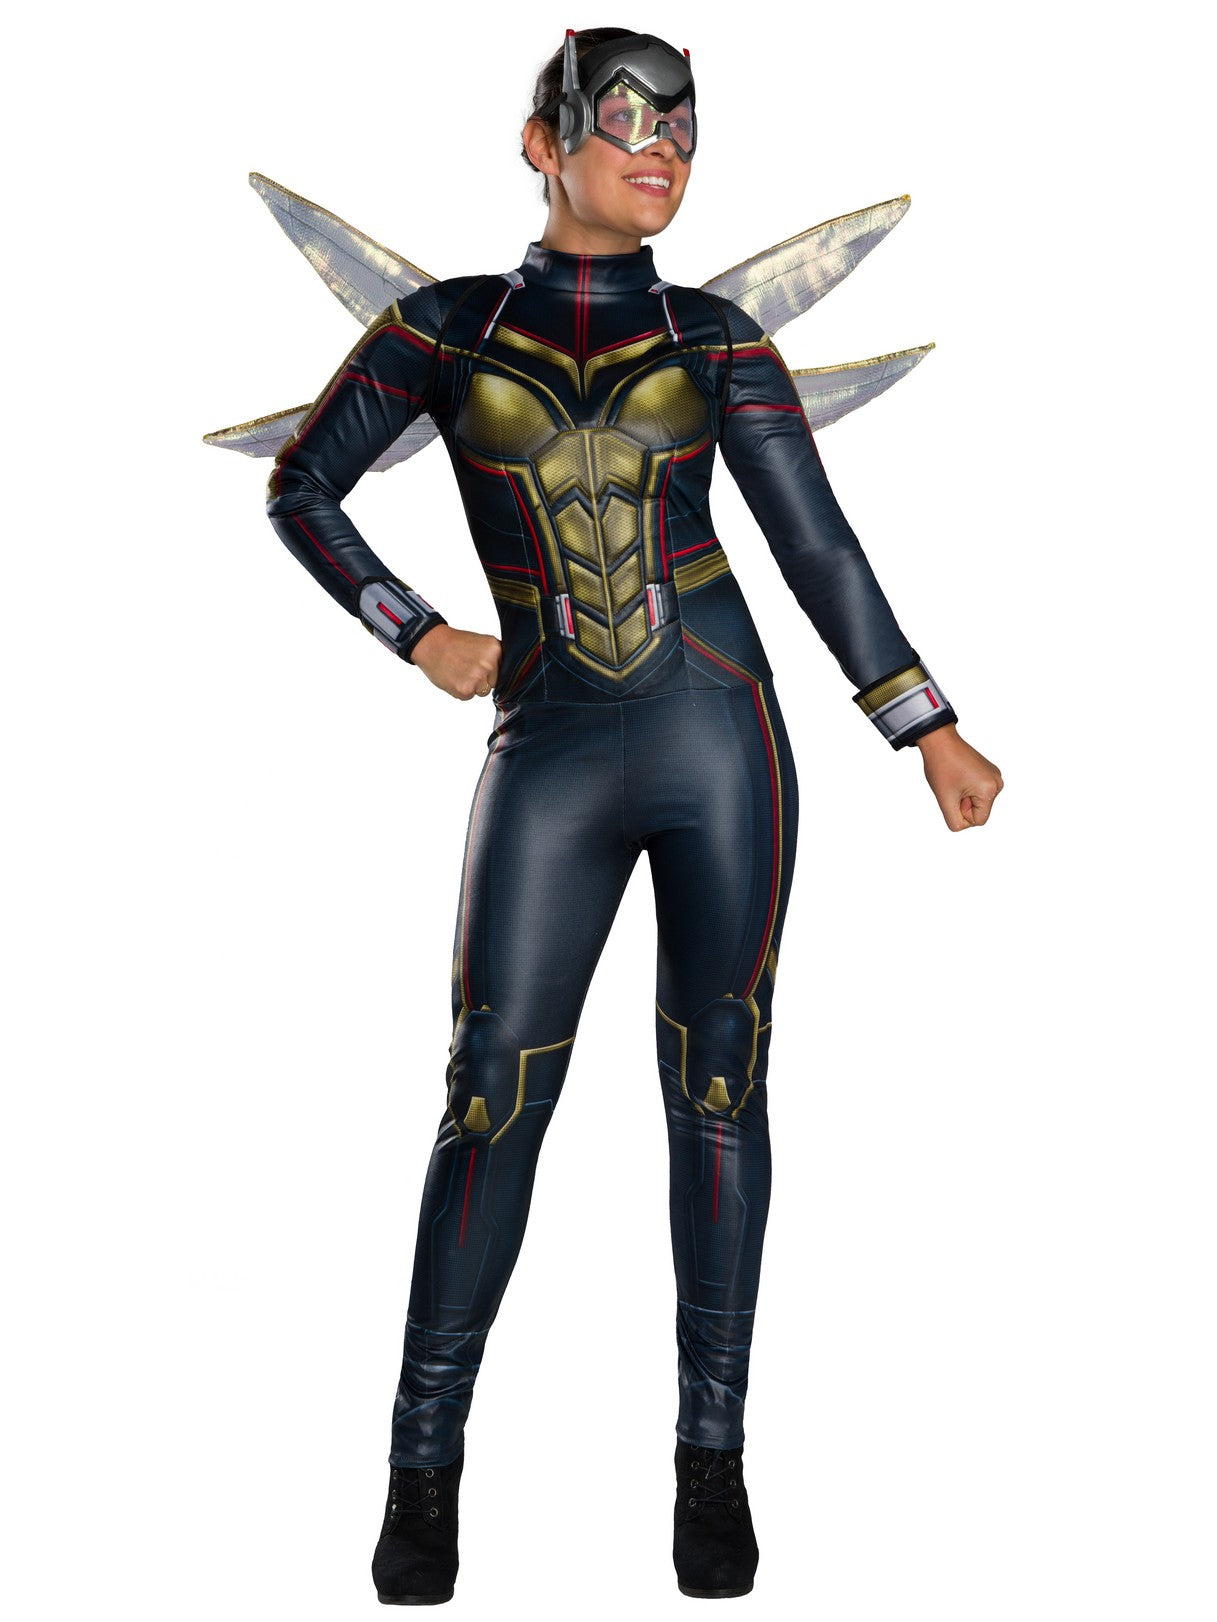 Women's Marvel Ant-Man and the Wasp: Wasp Costume - costumes.com